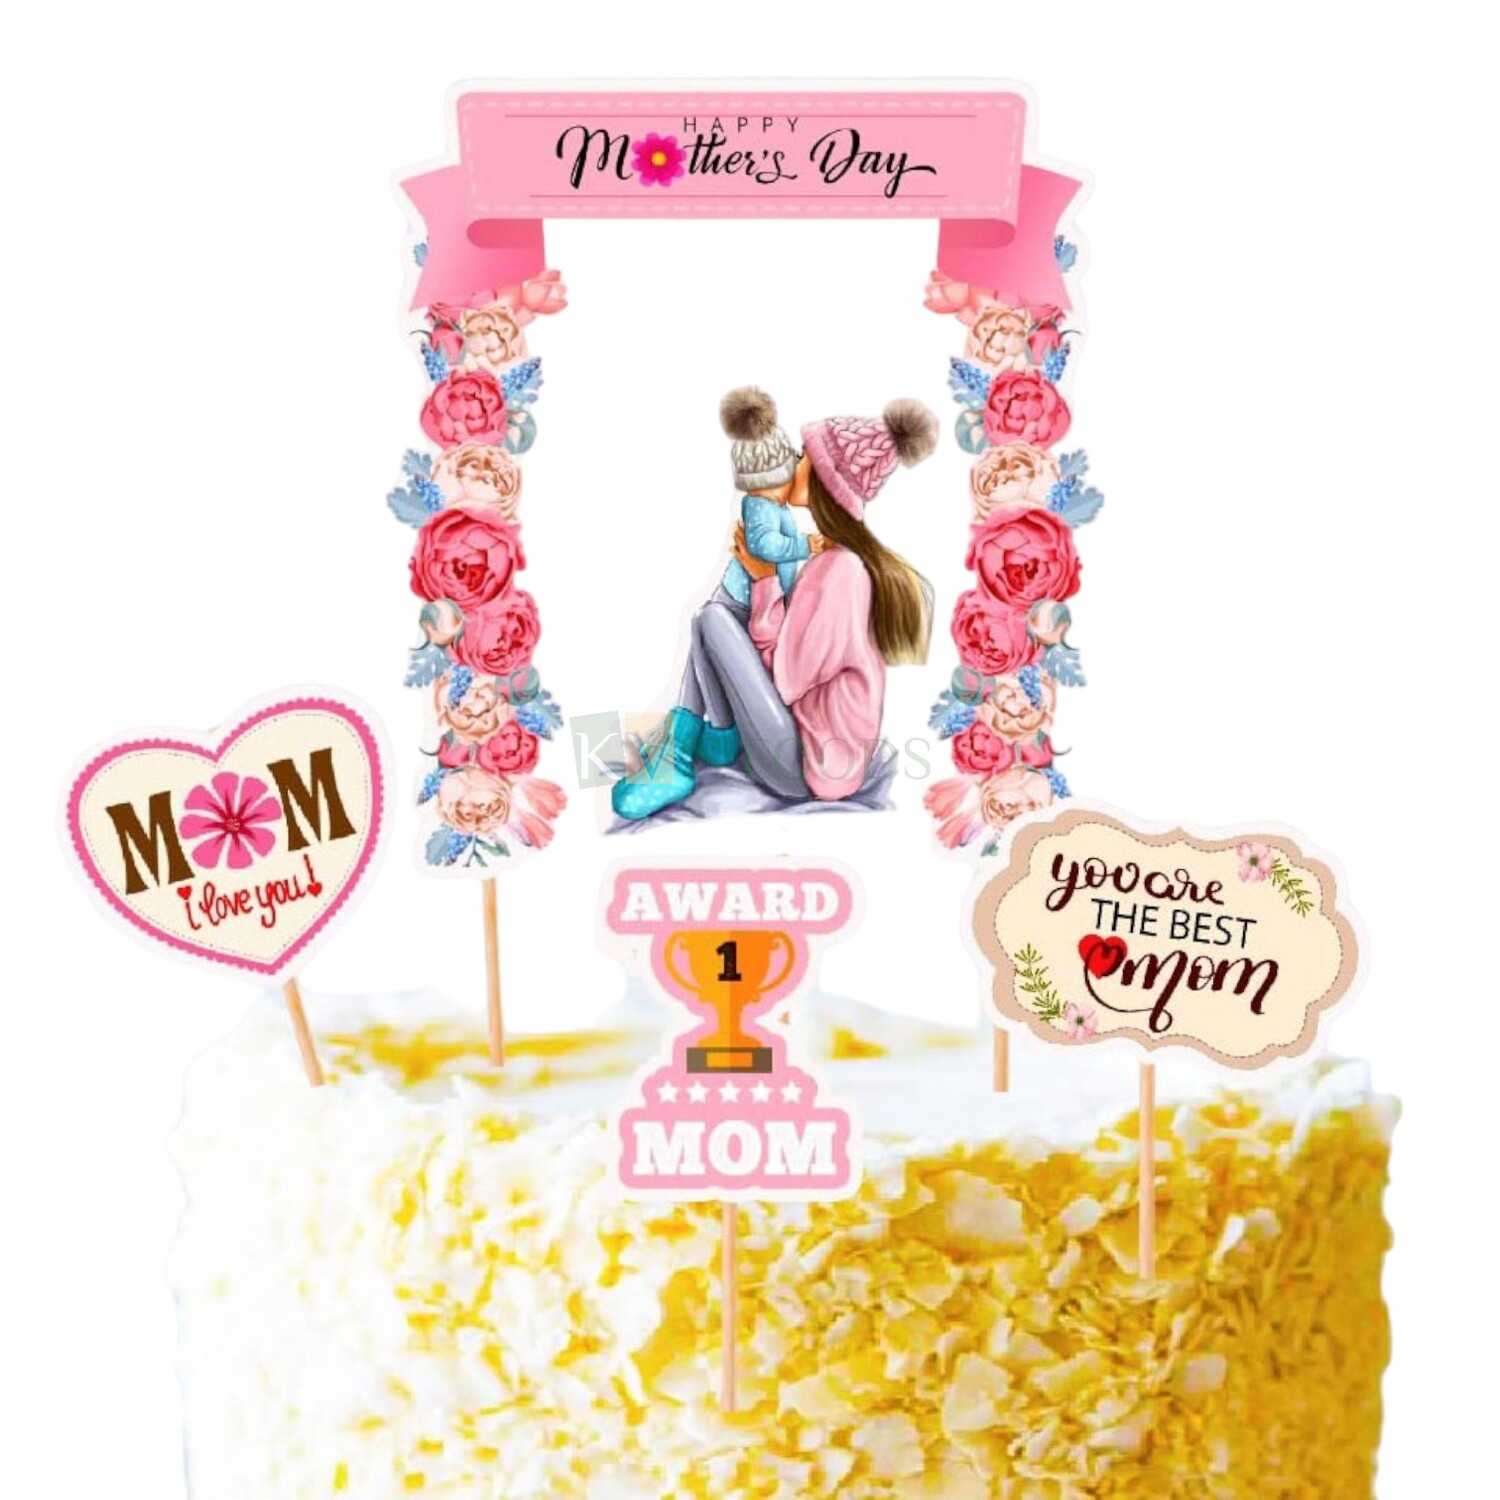 5 PC MOM Super Mom, Mother's Day Theme, Cake Topper Insert, Cake Topper, Cupcake Toppers Bday, Mom Bday Decorations Items/Cake Accessories, Tags, Cards, Cake Toothpick Topper